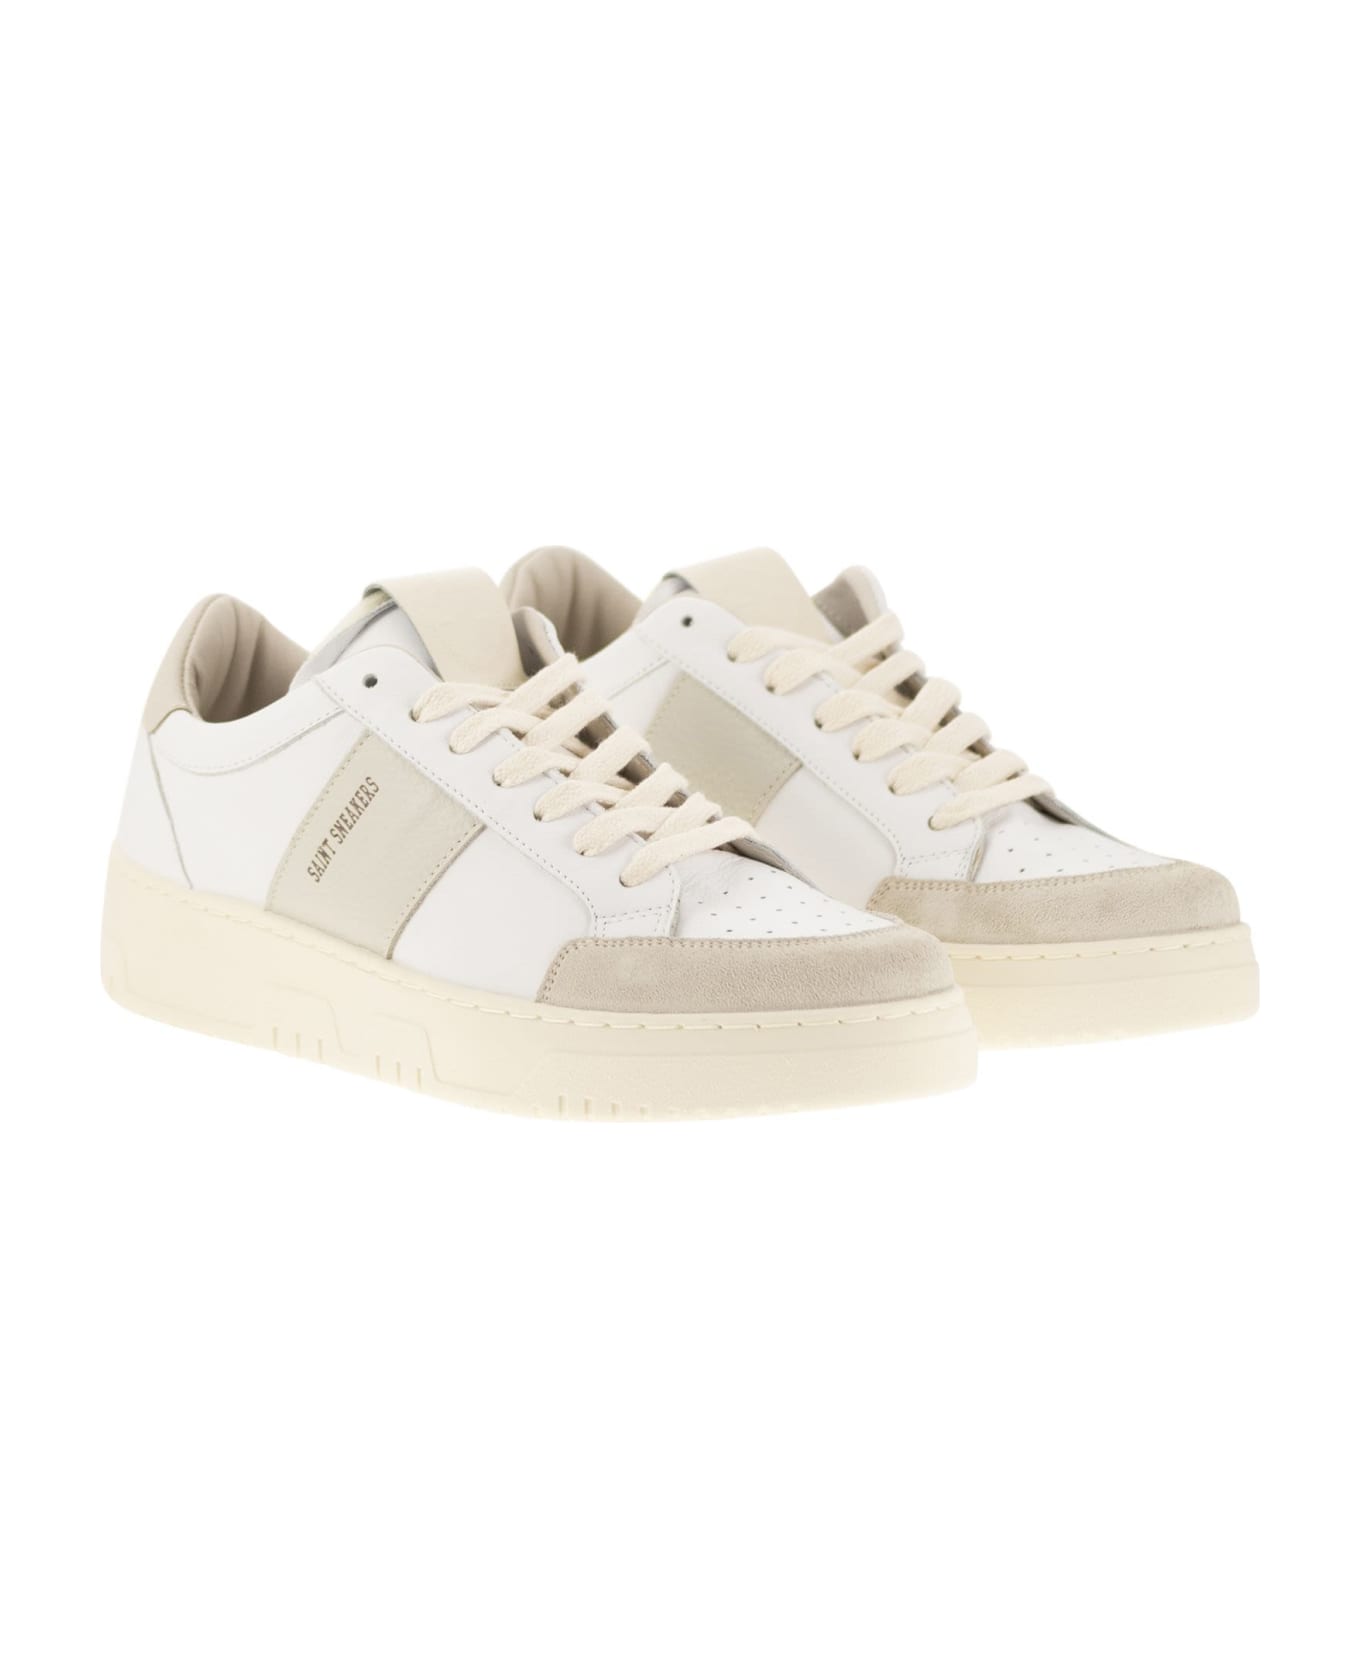 Saint Sneakers Sail - Leather And Suede Trainers - White/marble